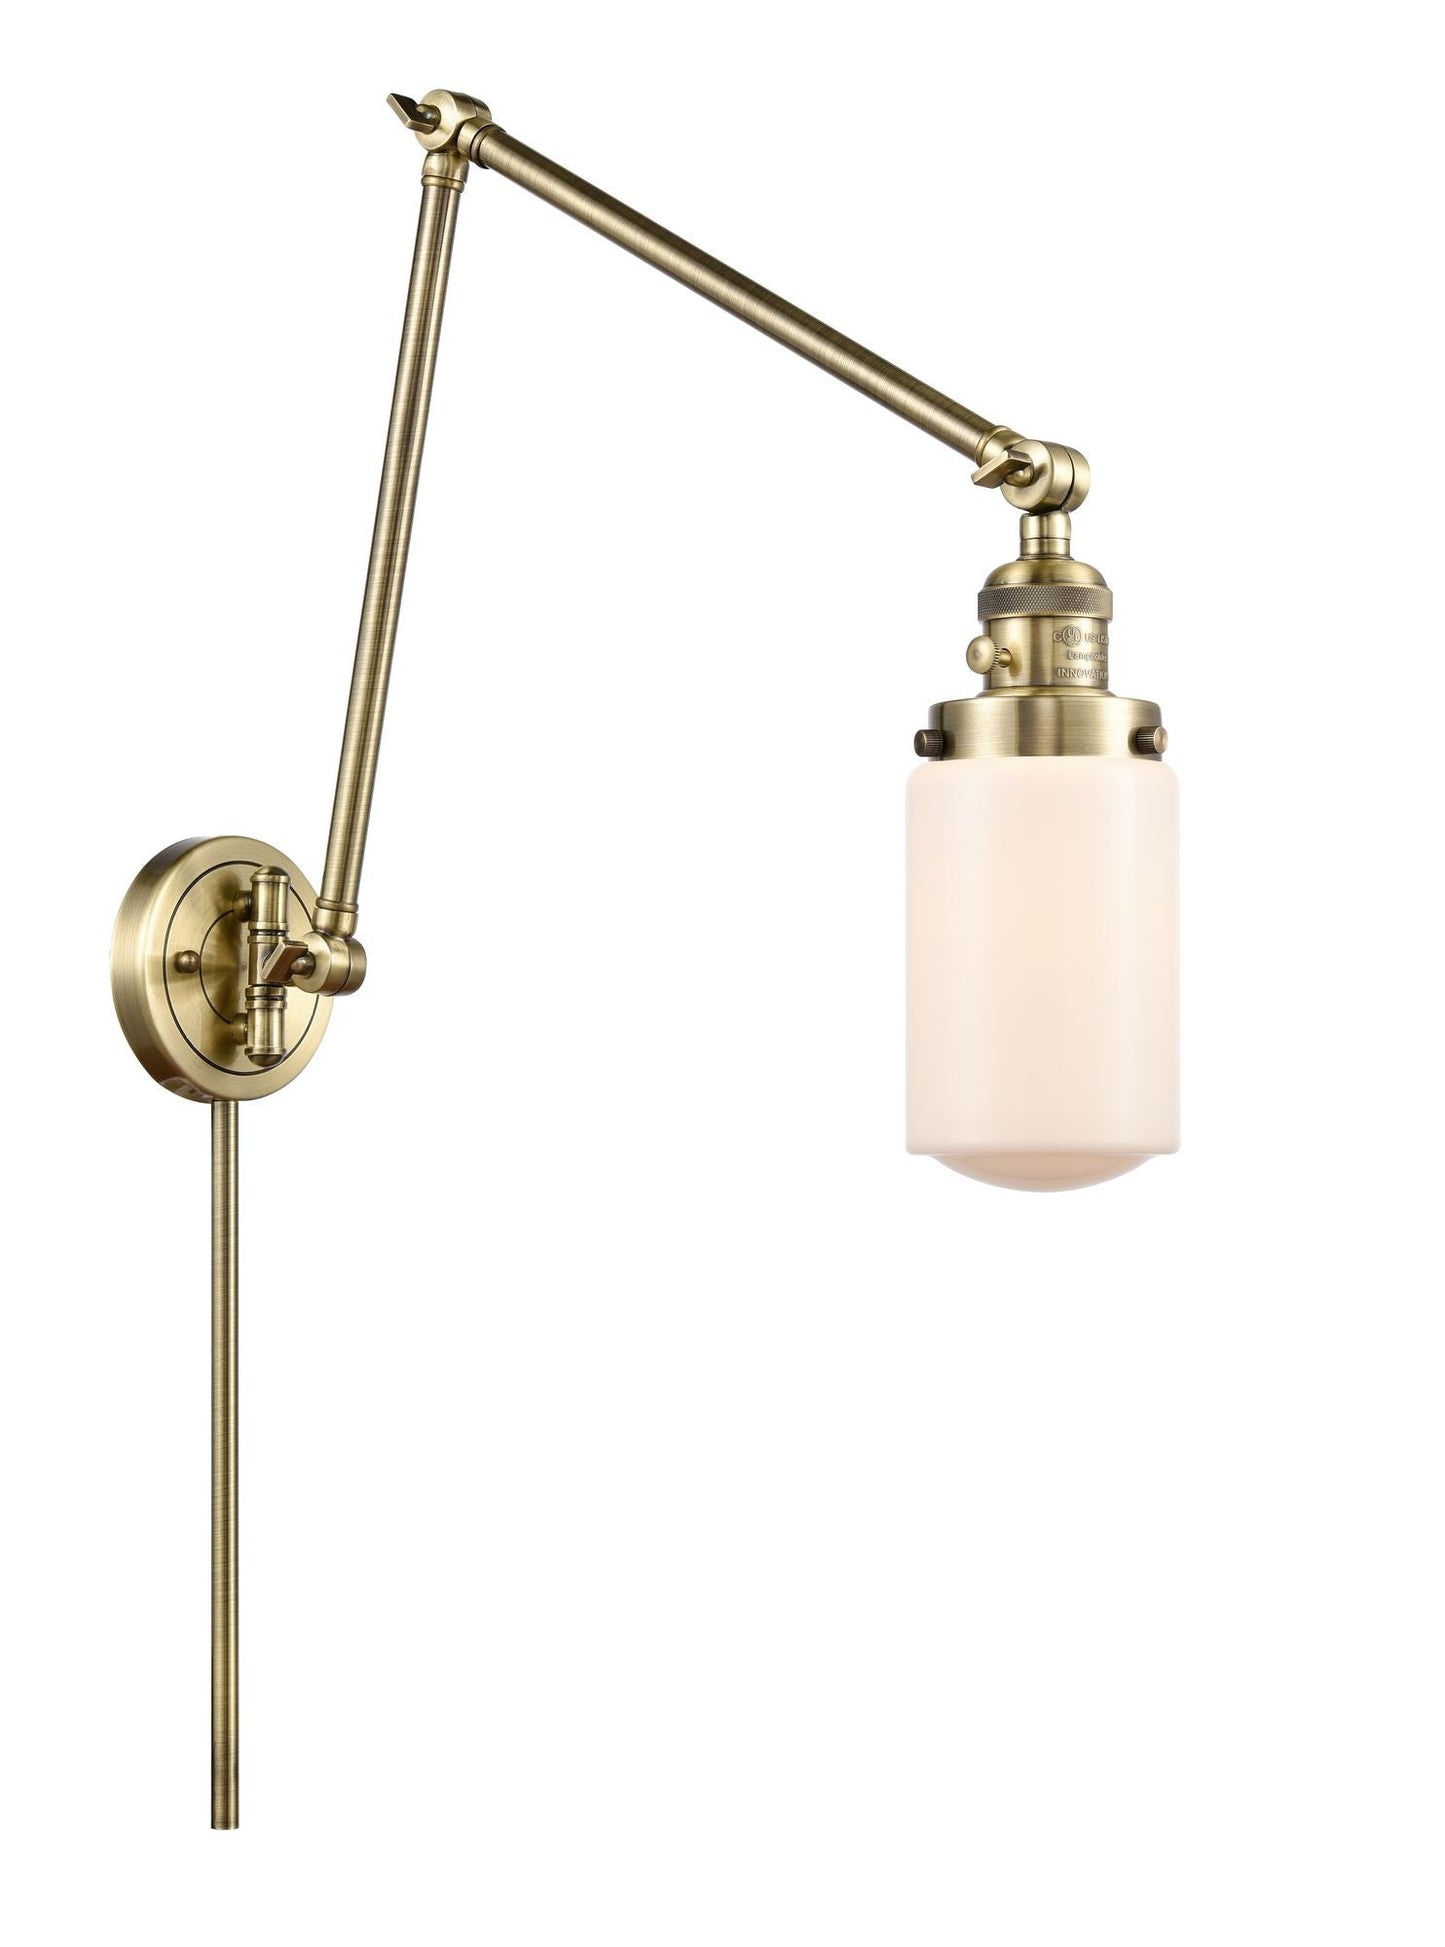 1-Light 4.5" Dover Swing Arm With Switch - Cylinder Matte White Glass - Choice of Finish And Incandesent Or LED Bulbs